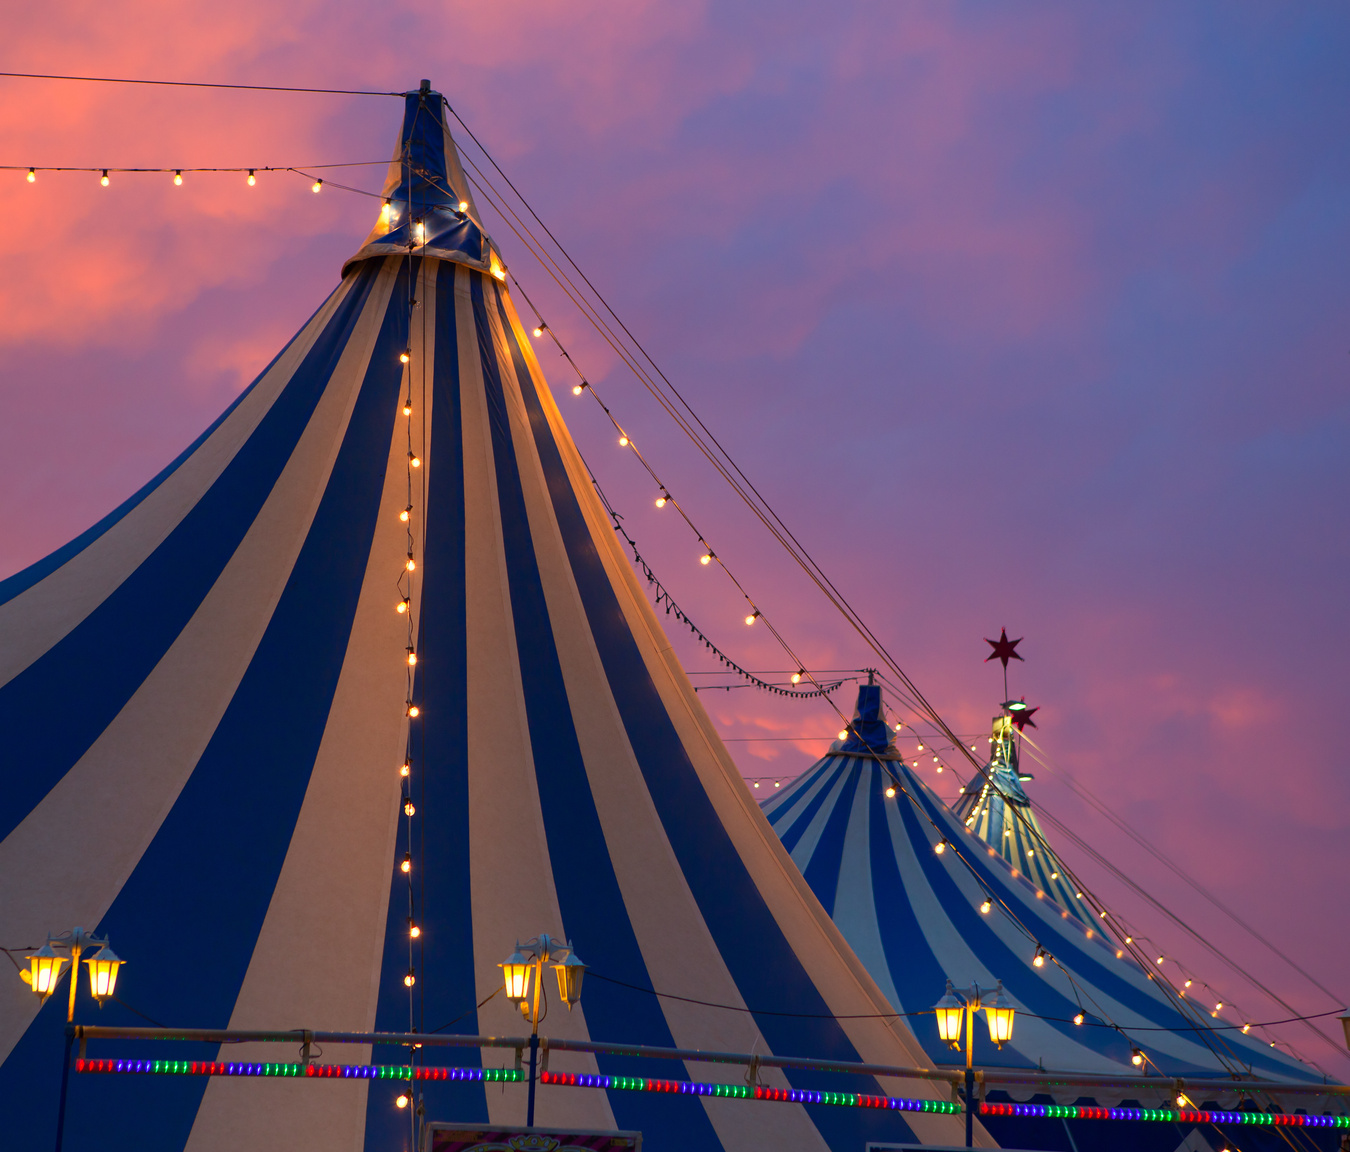 Circus Tent in a Dramatic Sunset Sky Colorful